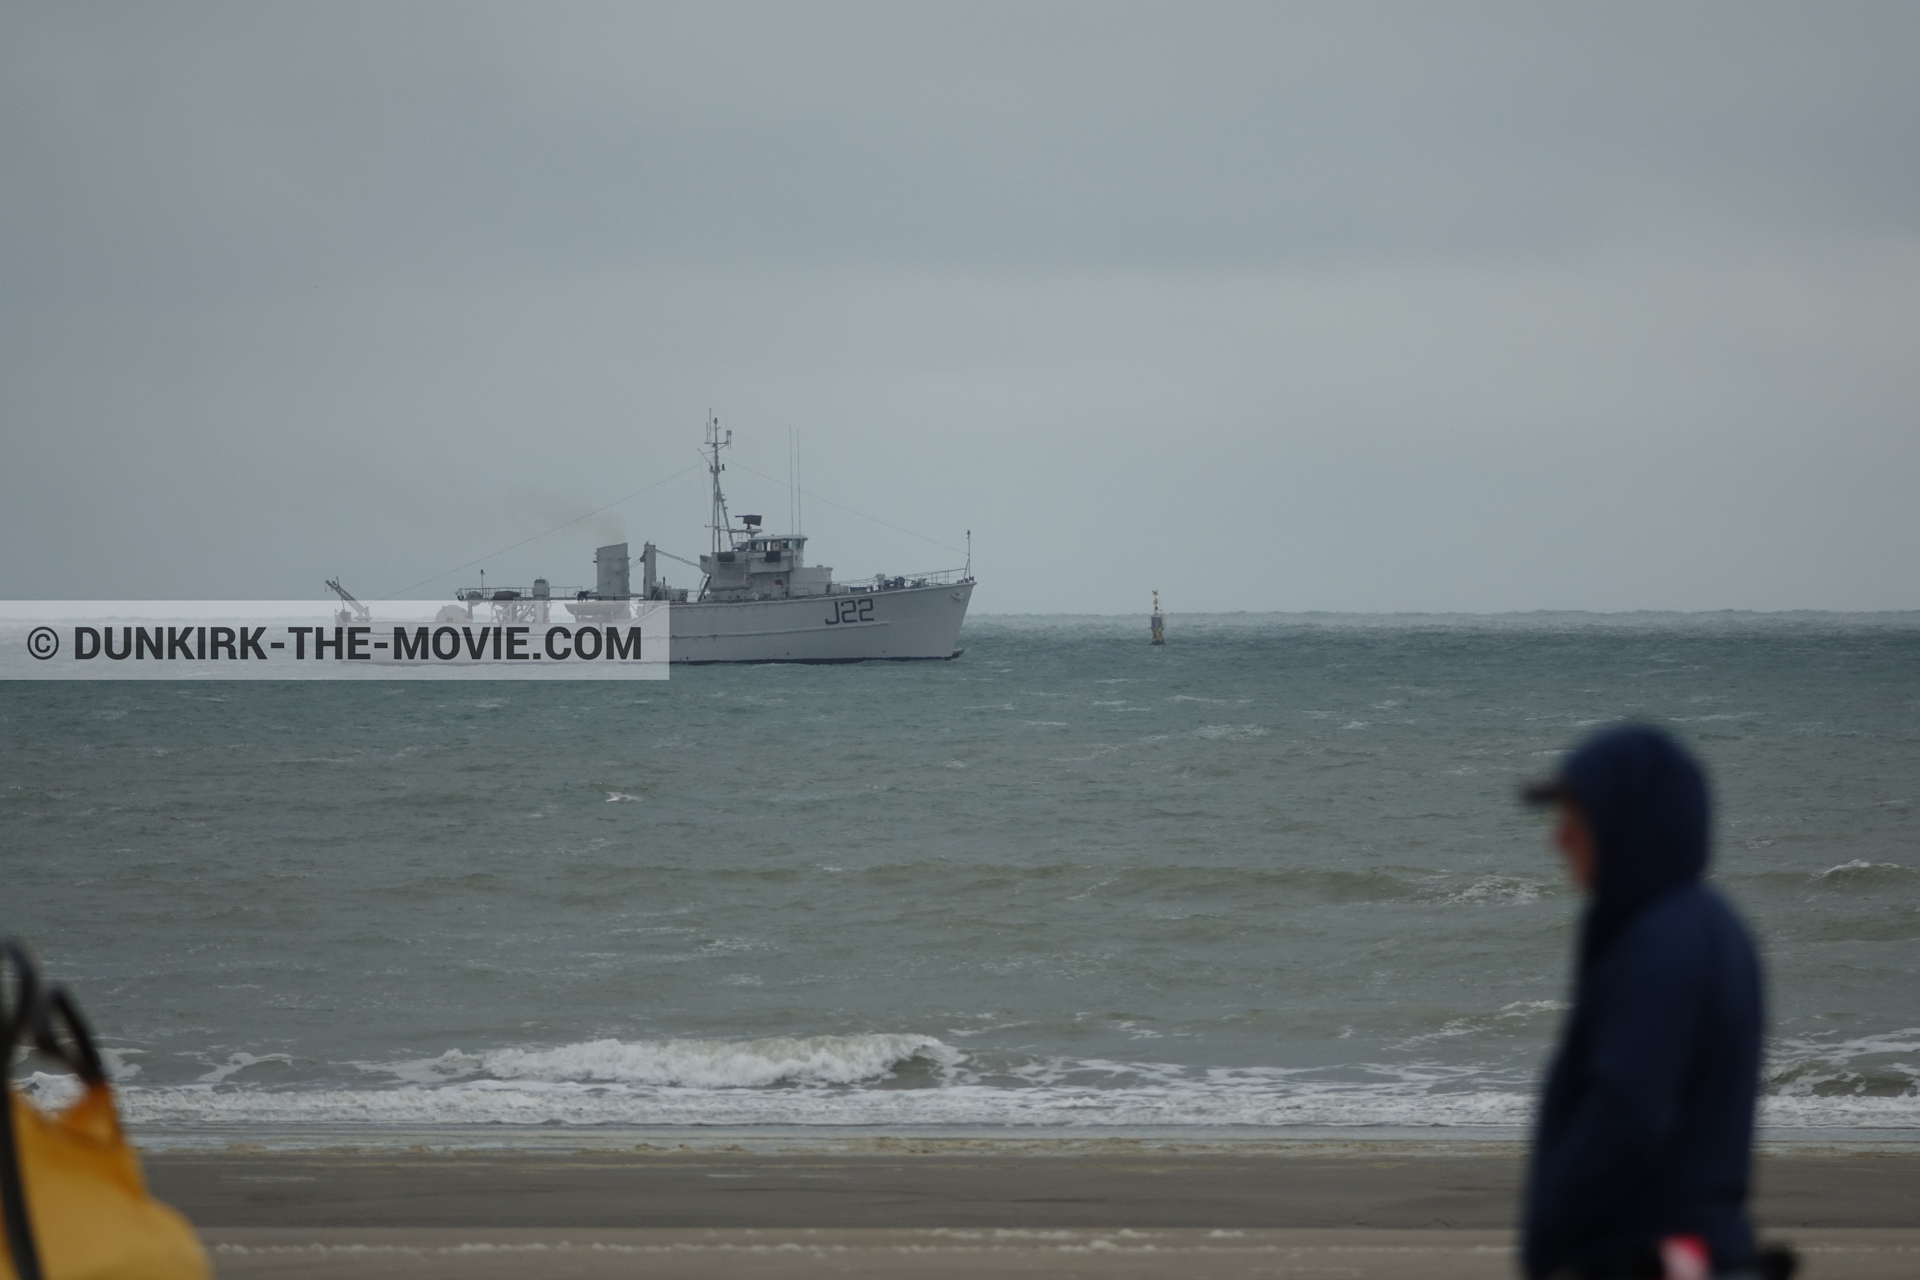 Picture with boat, J22 -Hr.Ms. Naaldwijk, beach, technical team,  from behind the scene of the Dunkirk movie by Nolan